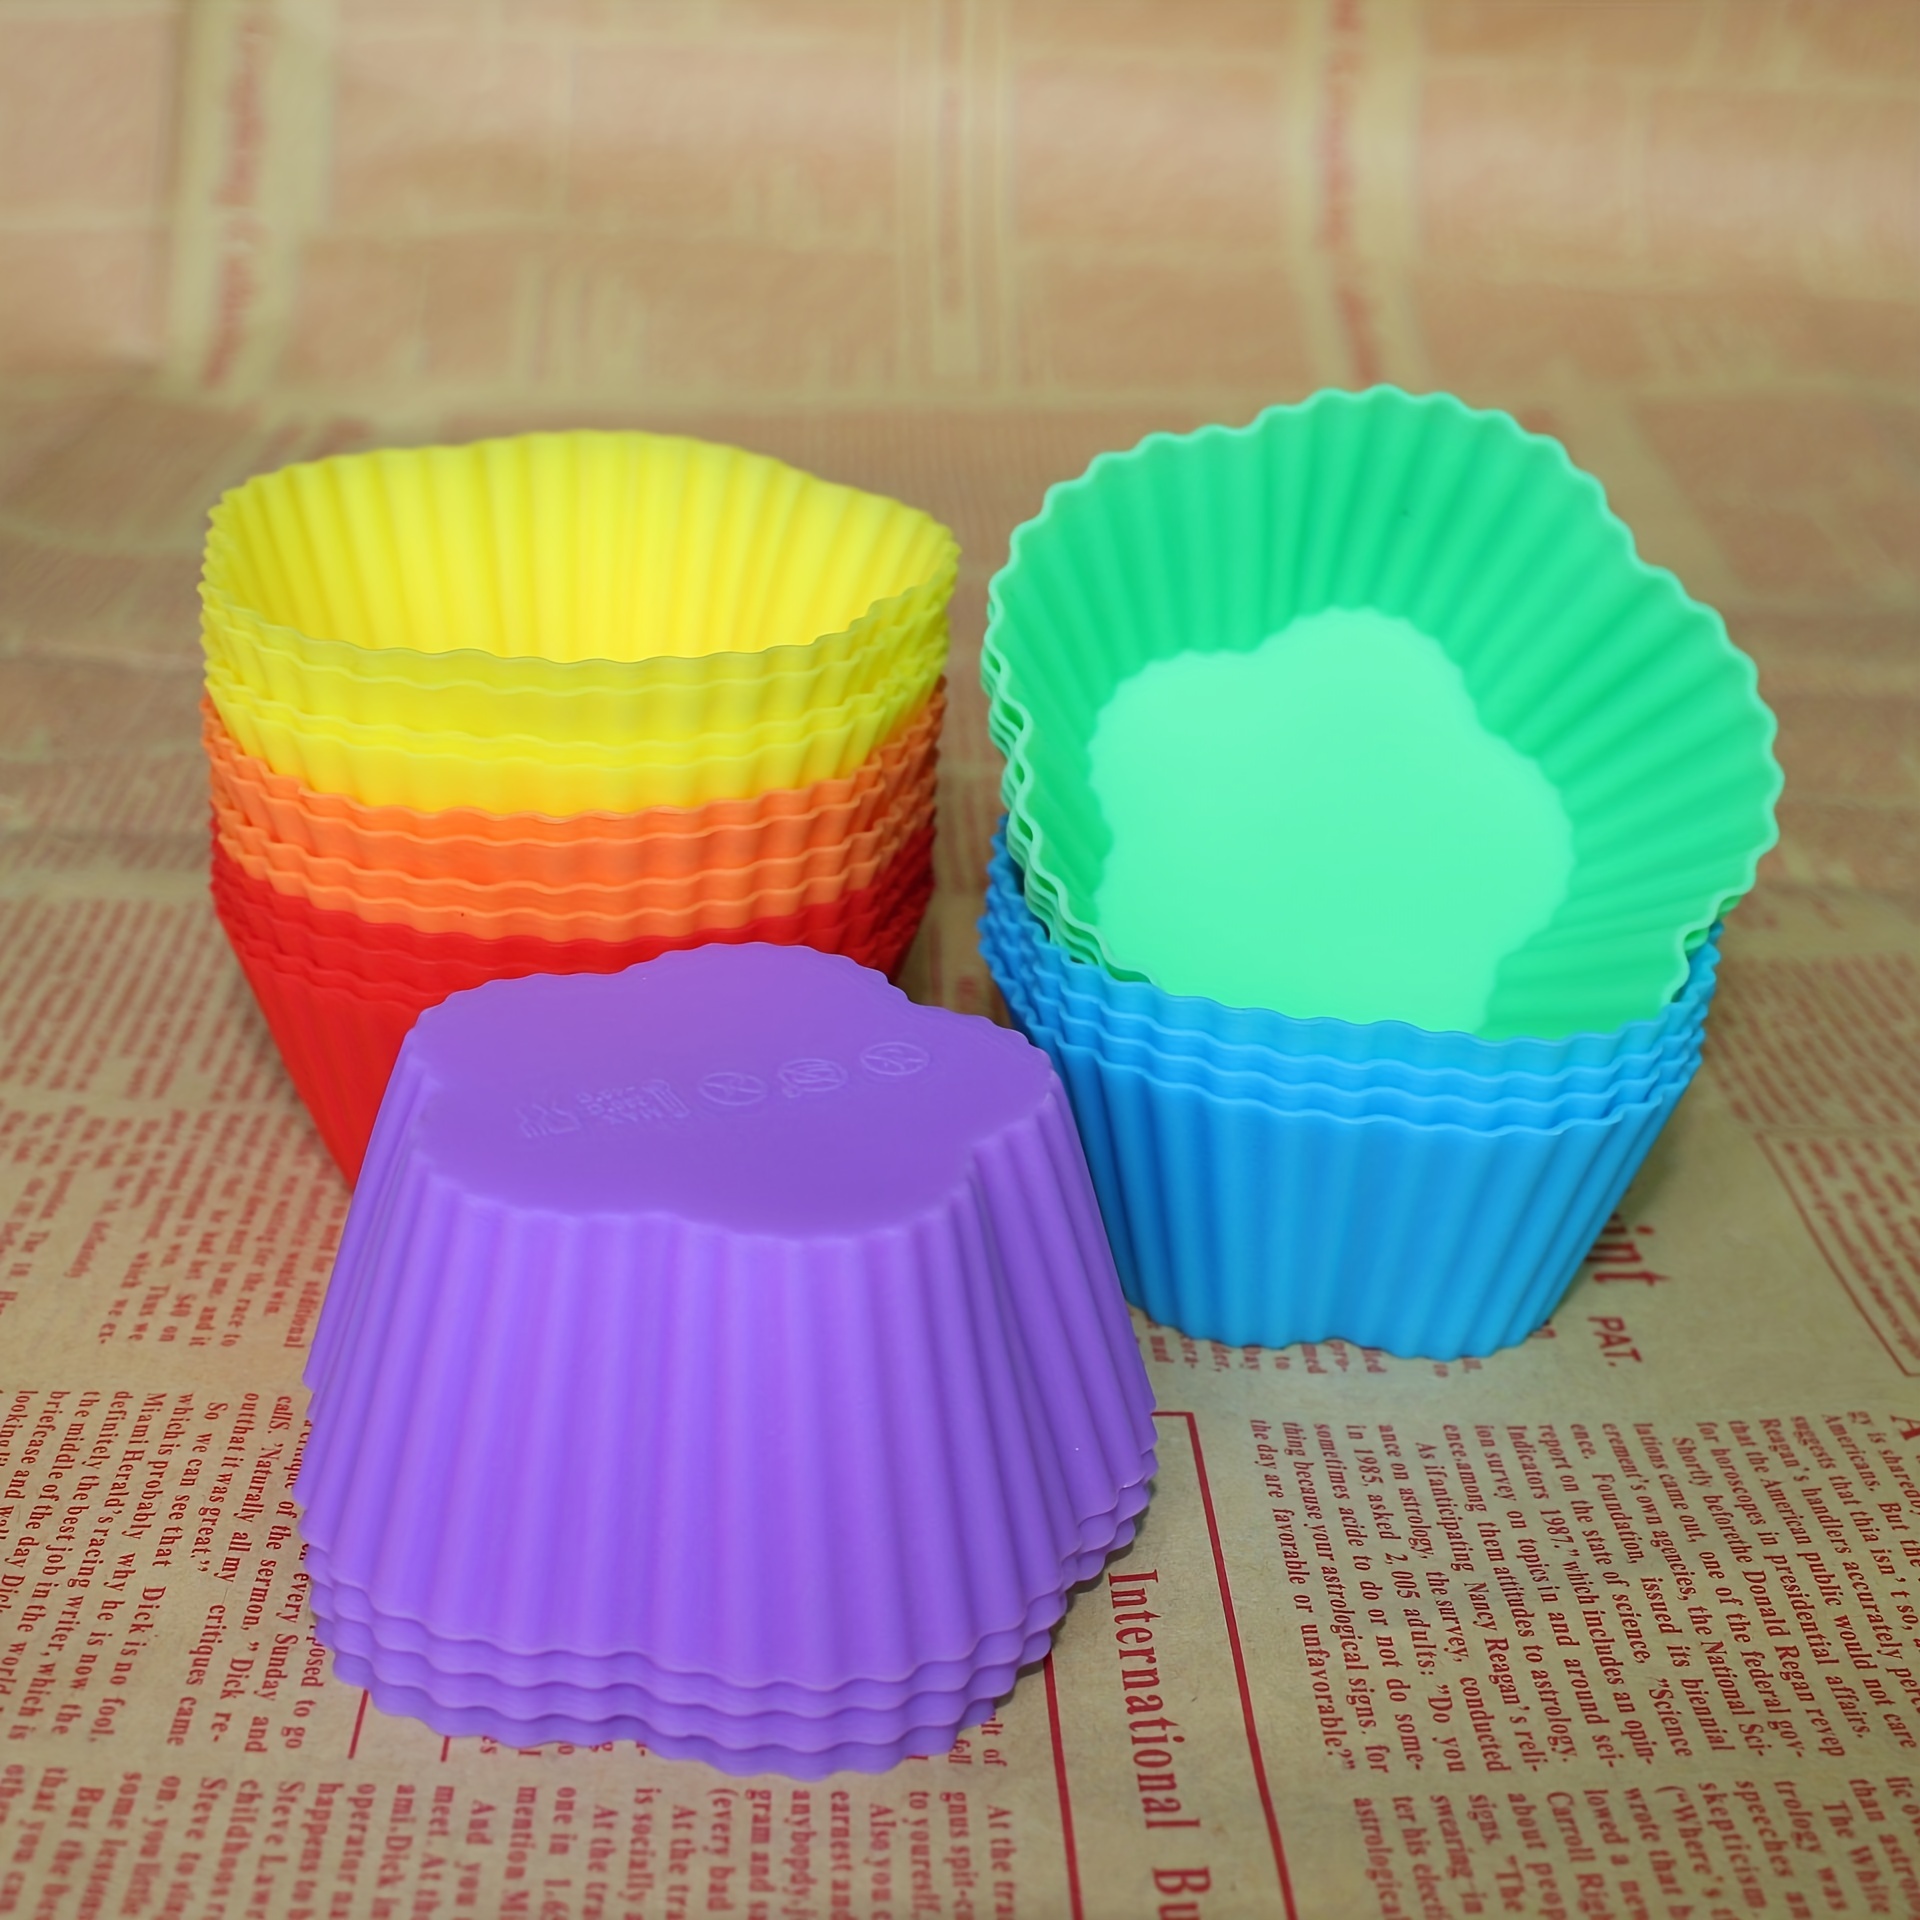 Round Metal Flower Shape Cake Mold Muffin Cups, Paper Cupcake Molds, Mini Cupcake Liners for Dessert, Wedding, Birthday Party